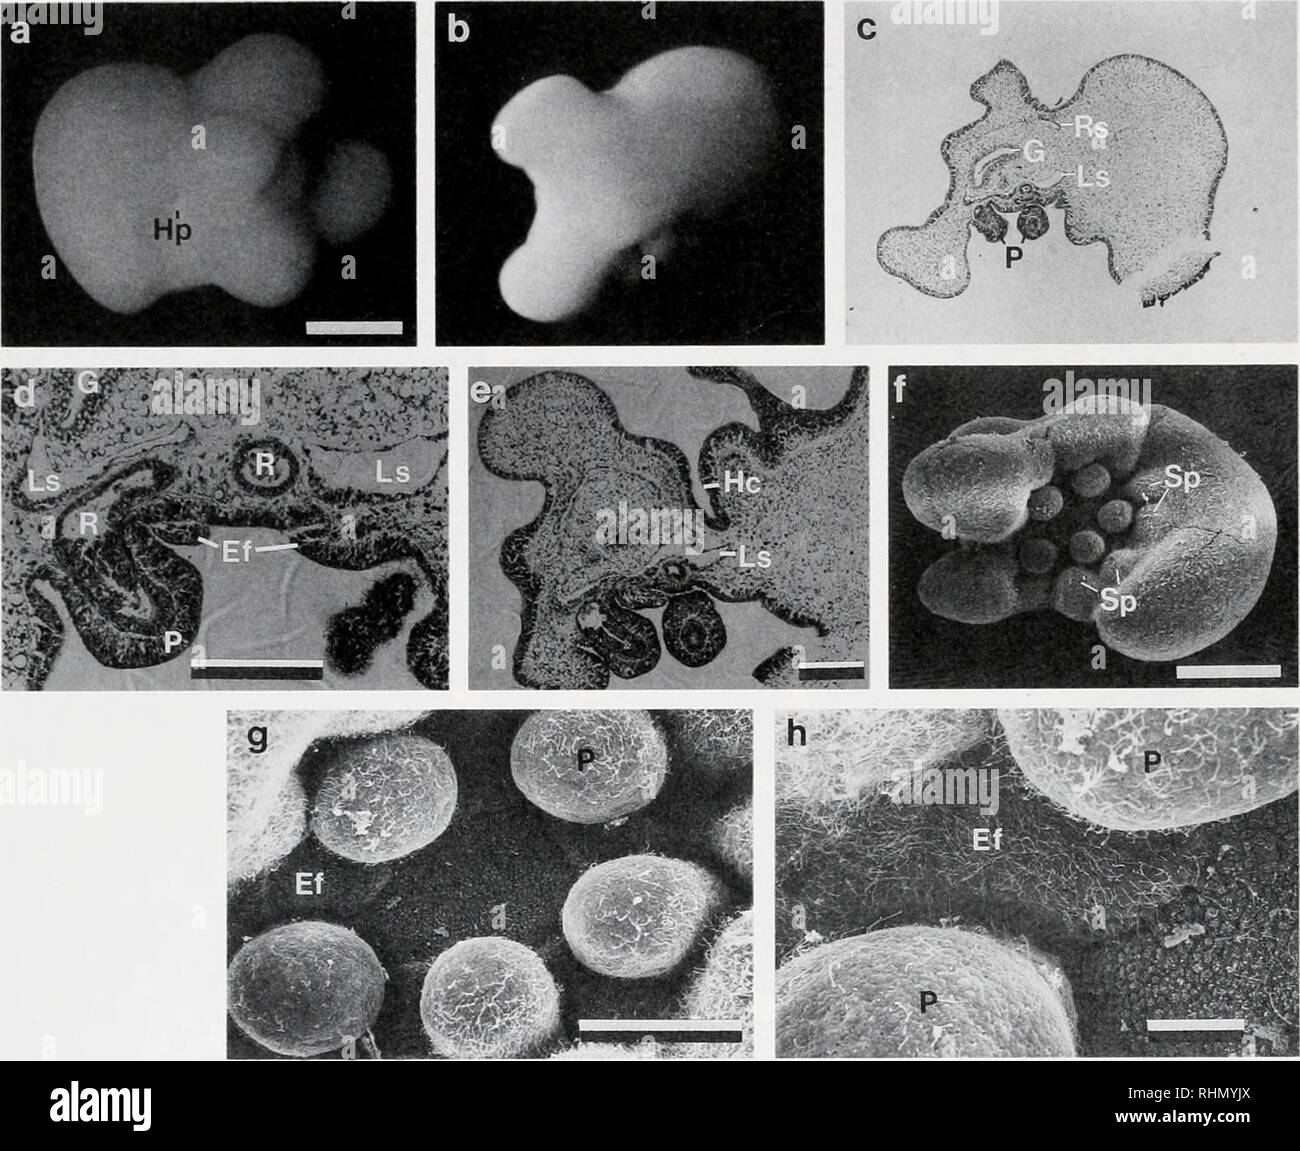 . The Biological bulletin. Biology; Zoology; Biology; Marine Biology. ECHINOTHURIOID DEVELOPMENT, REVISITED 23. Figure 7. A 101-h larvae of Asthenosoma ijimai. a. Light micrograph of dorsal side of live specimen. Note the hydropore (Hp) and four para-arms (to right). The anterior end is to the left of figure. Scale bar, 0.5 mm. b. Light micrograph of ventral side of live specimen. The anterior end is to the right of figure. Same scale as a. c. Medial frontal section through larva shows developing internal structures and juvenile oral region. P, podia; Rs, right somatocoel; Ls. left somatocoel; Stock Photo